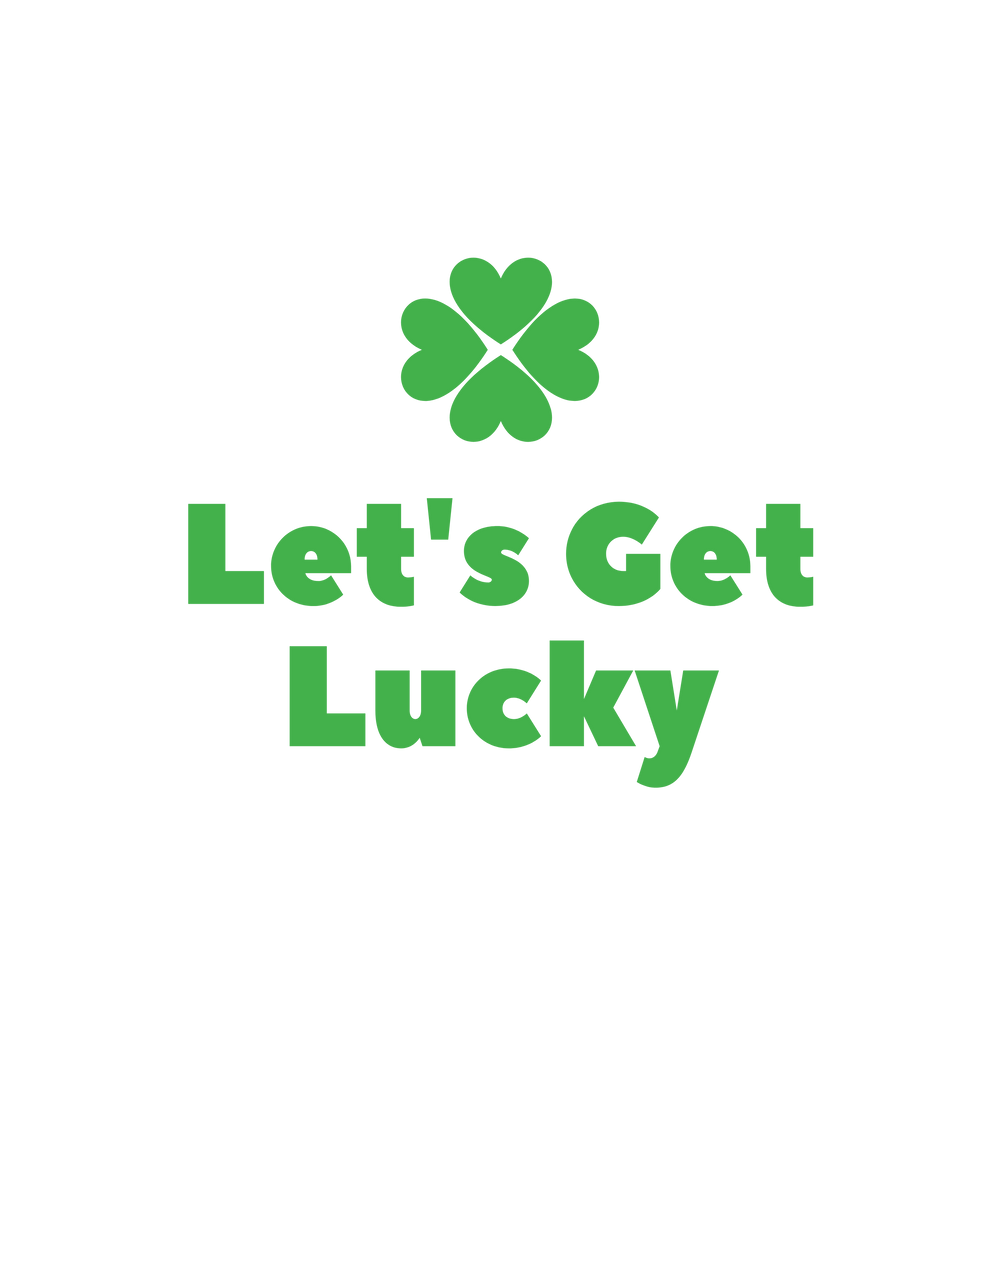 Let's Get Lucky Tee